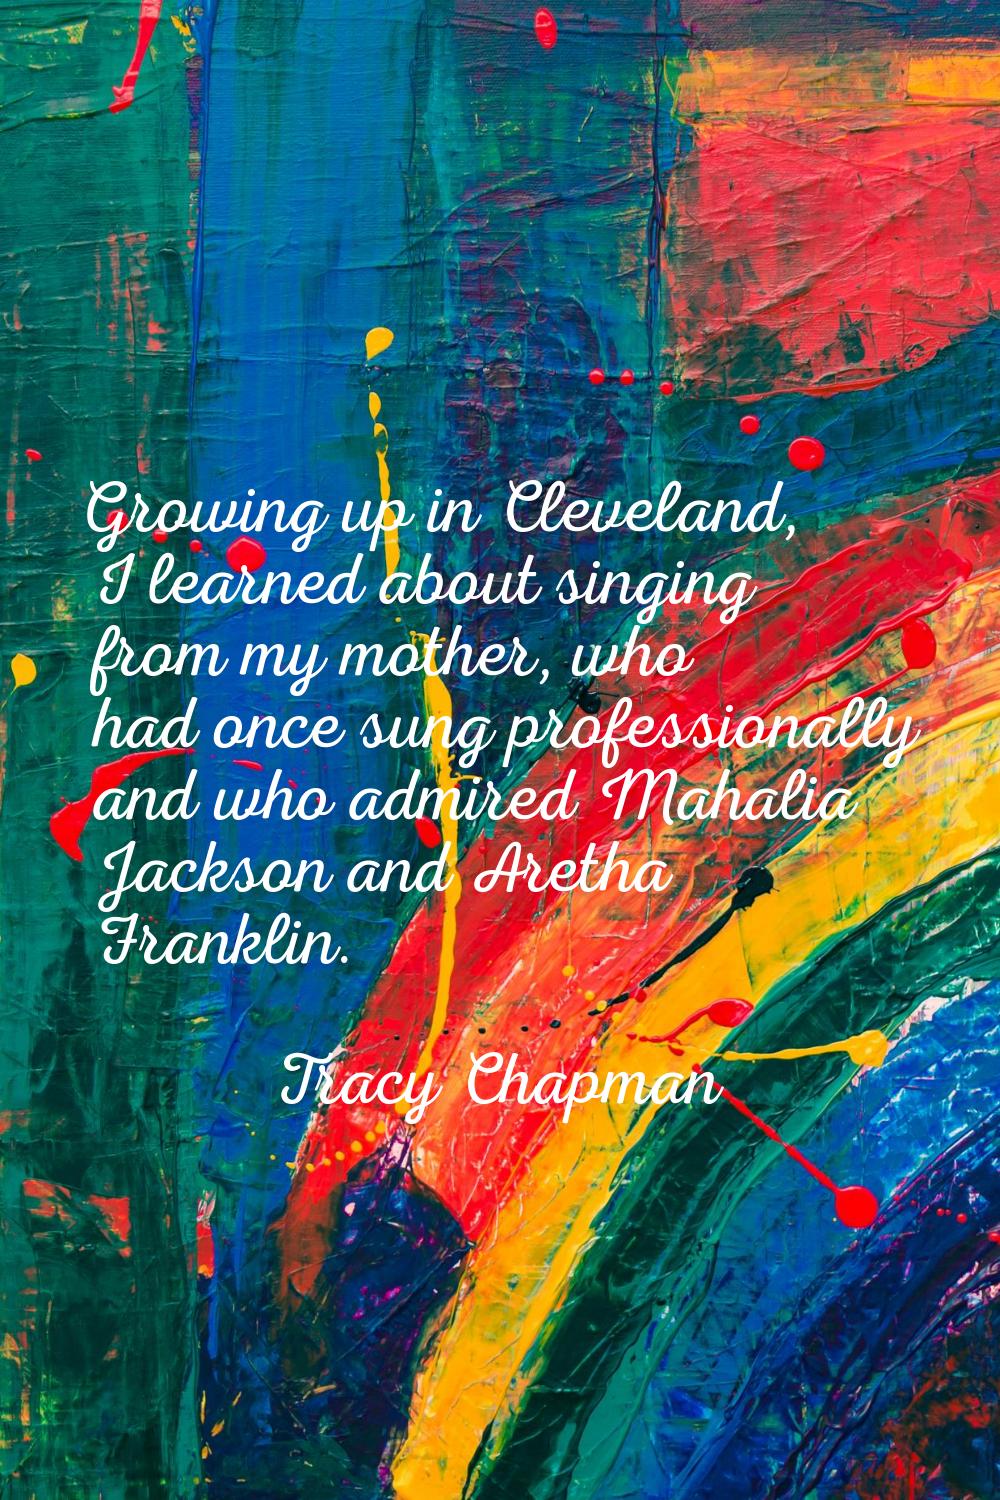 Growing up in Cleveland, I learned about singing from my mother, who had once sung professionally a